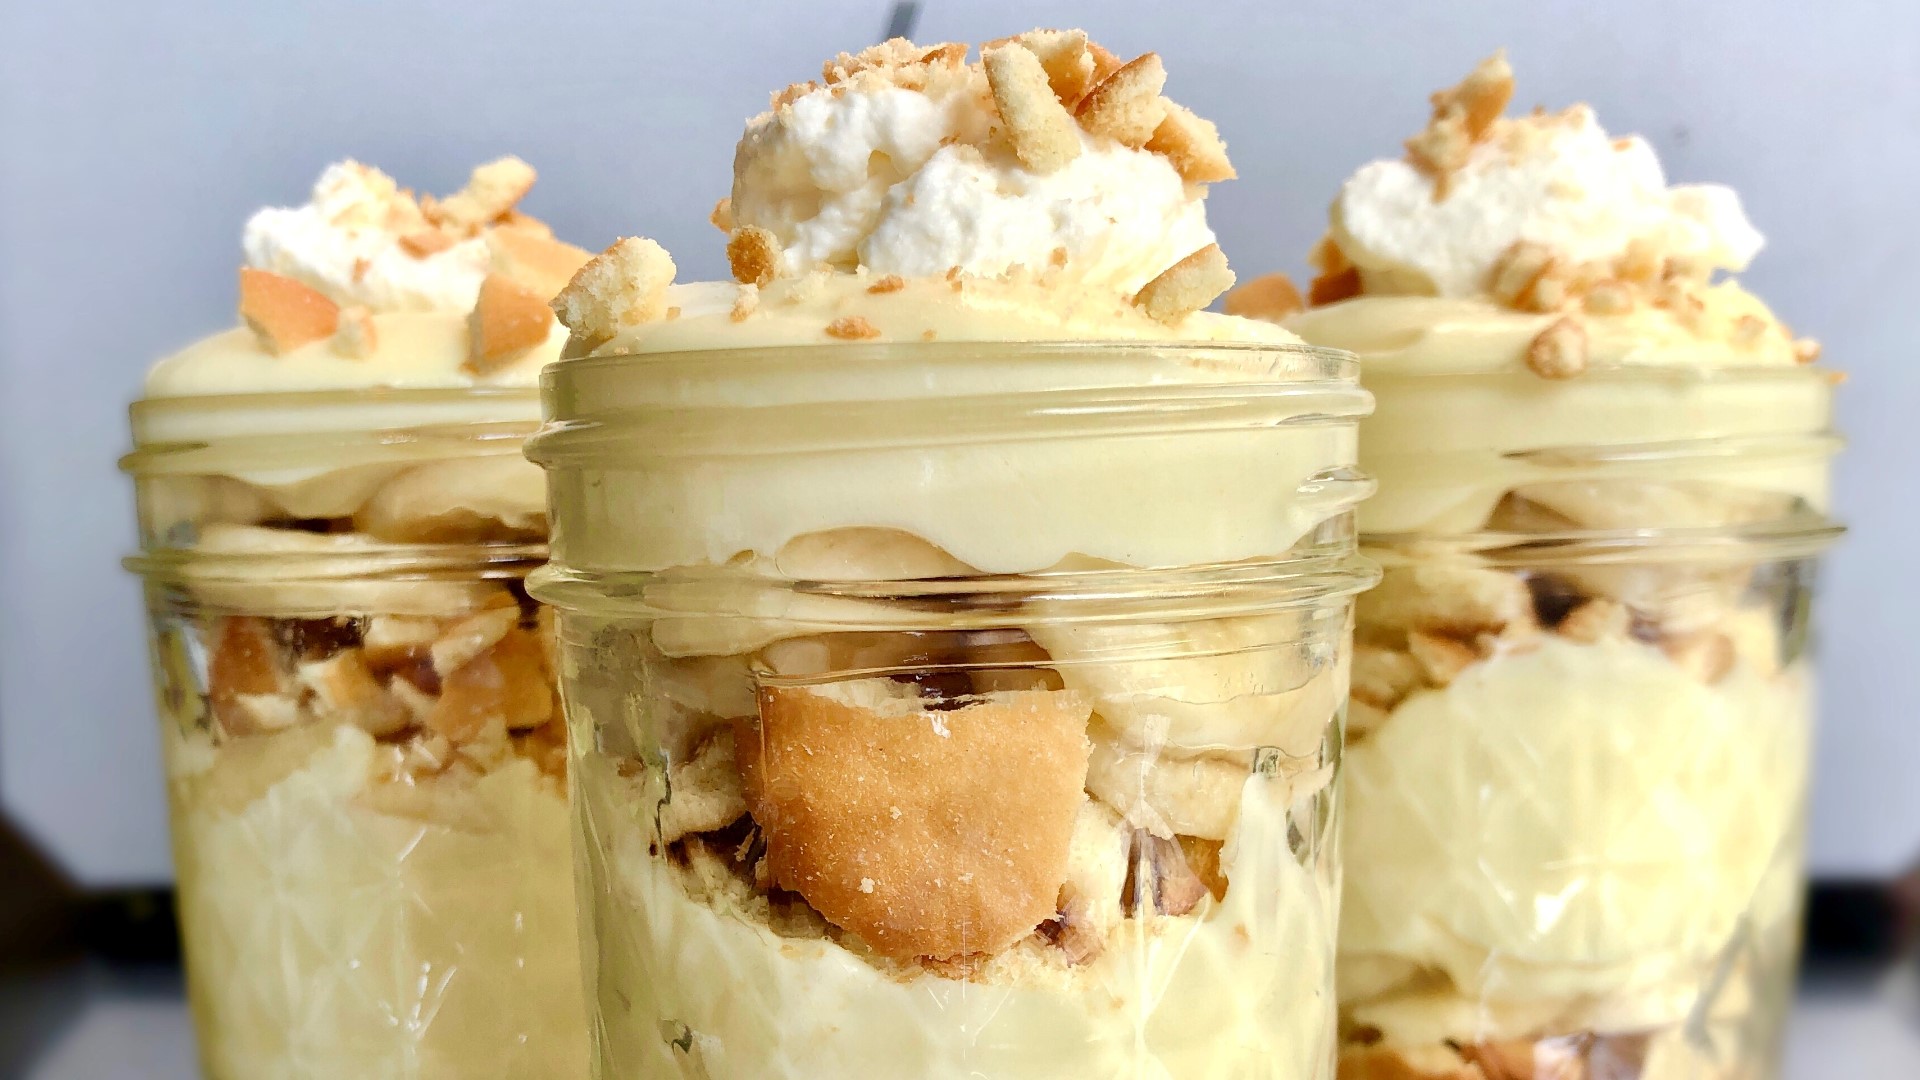 Sunday is National Vanilla Pudding Day, so why not create a delicious banana pudding parfait?